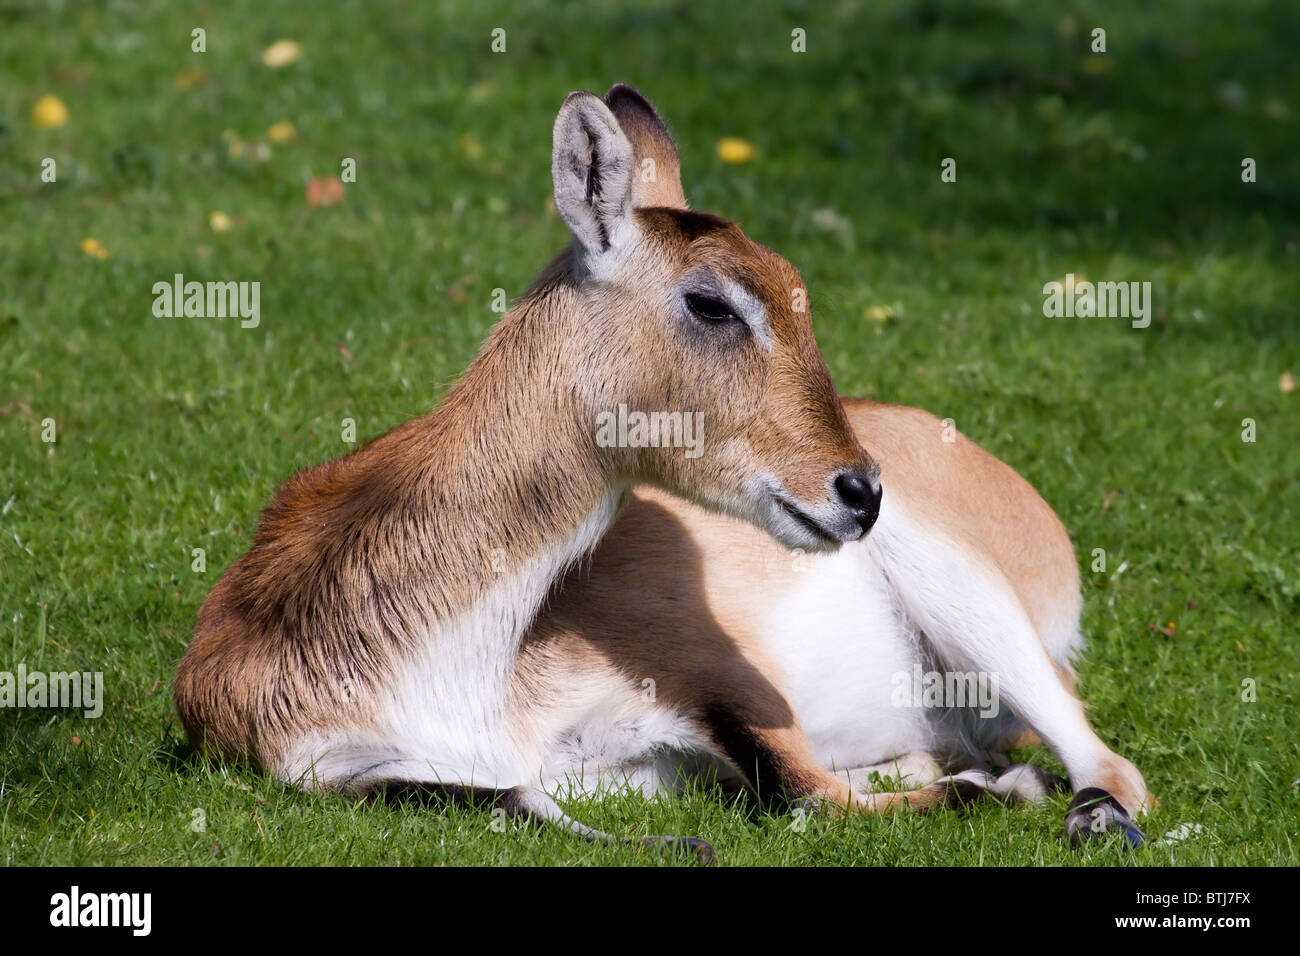 Deer laying down on the grass resting Stock Photo